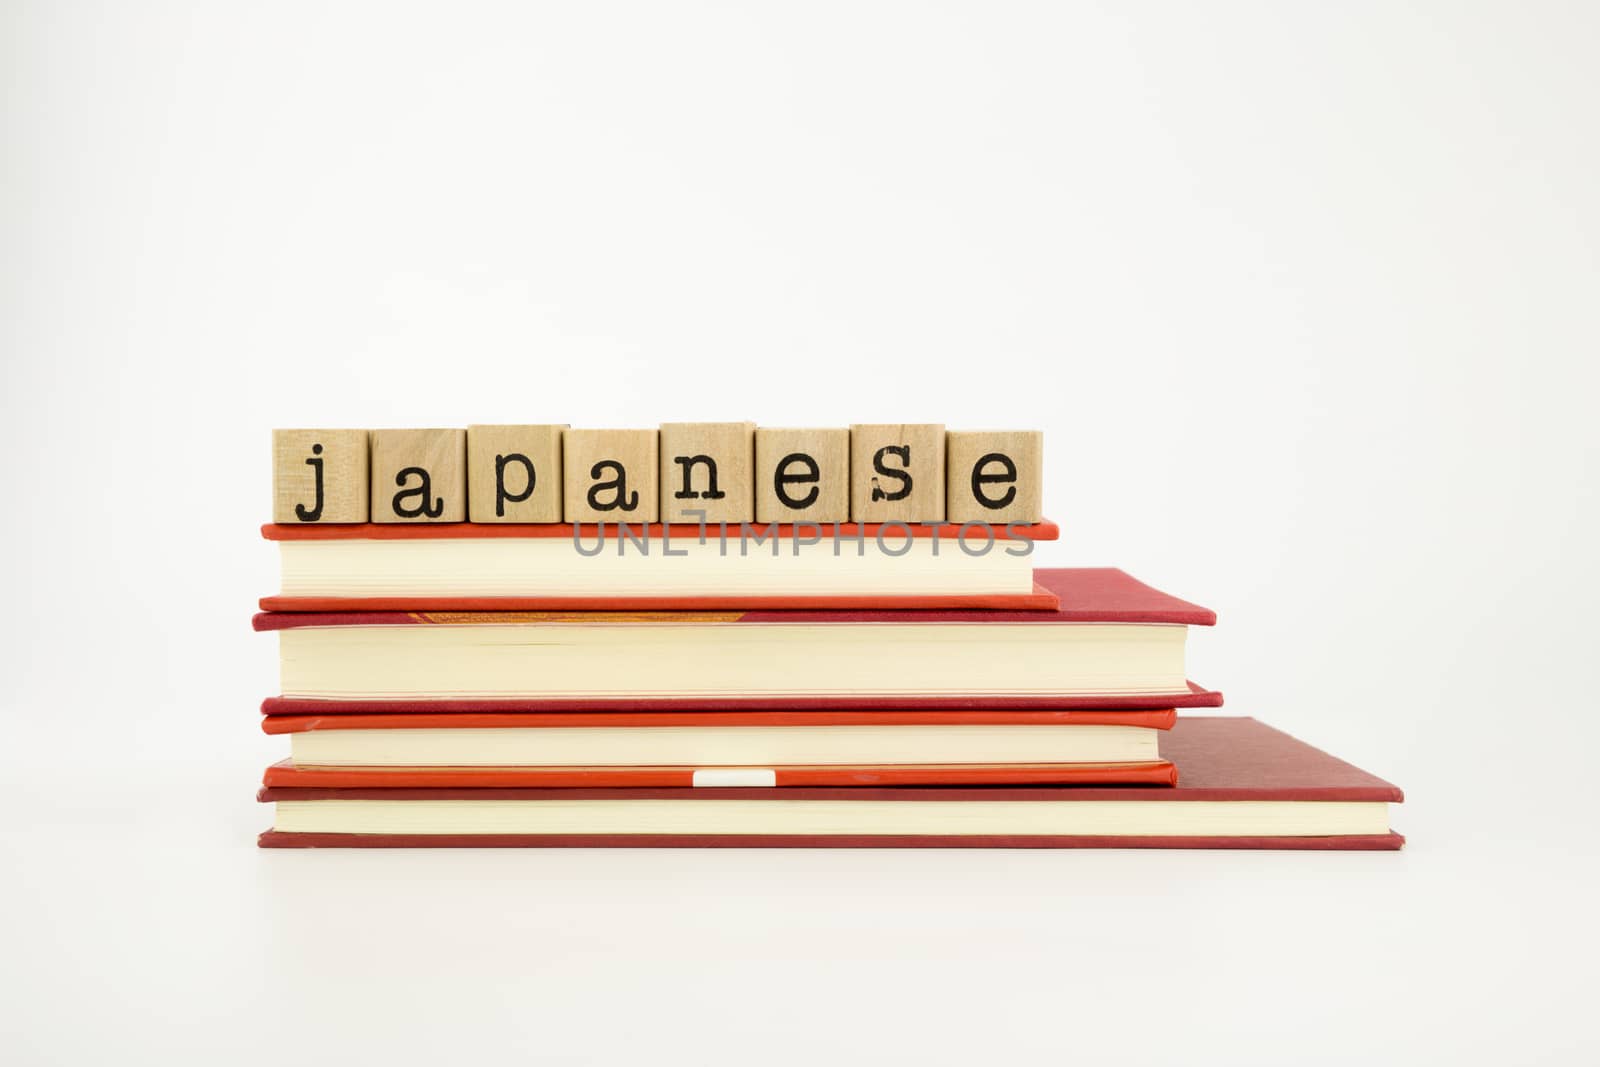 japanese language word on wood stamps and books by vinnstock